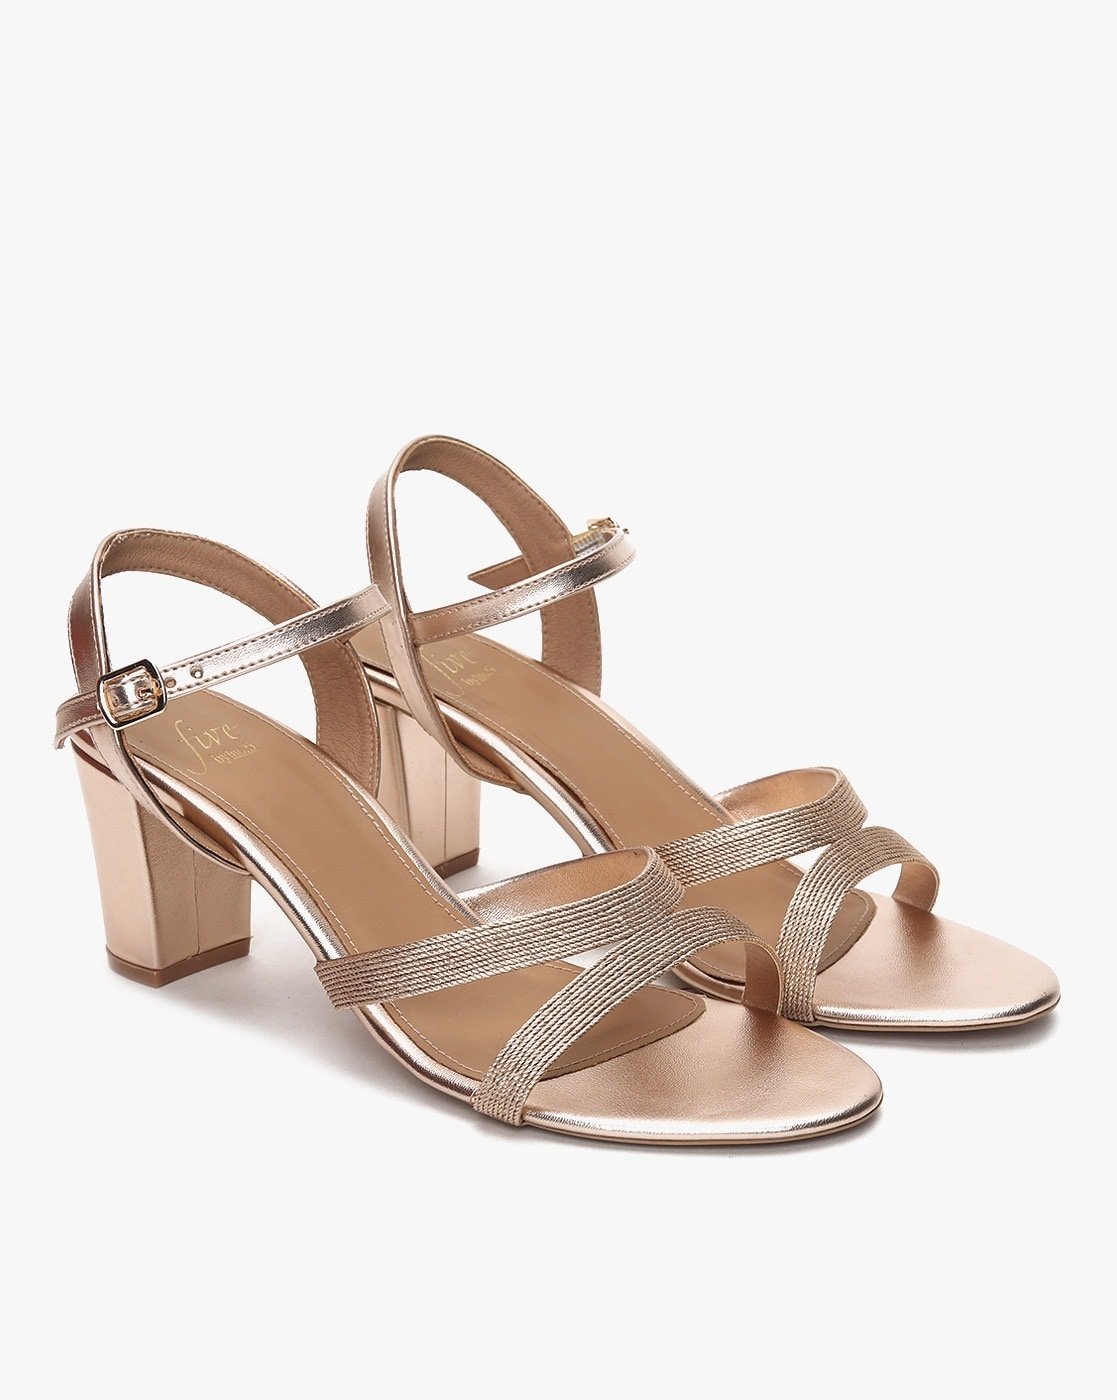 River Island Gold Metallic Embellished Sandals in Brown | Lyst